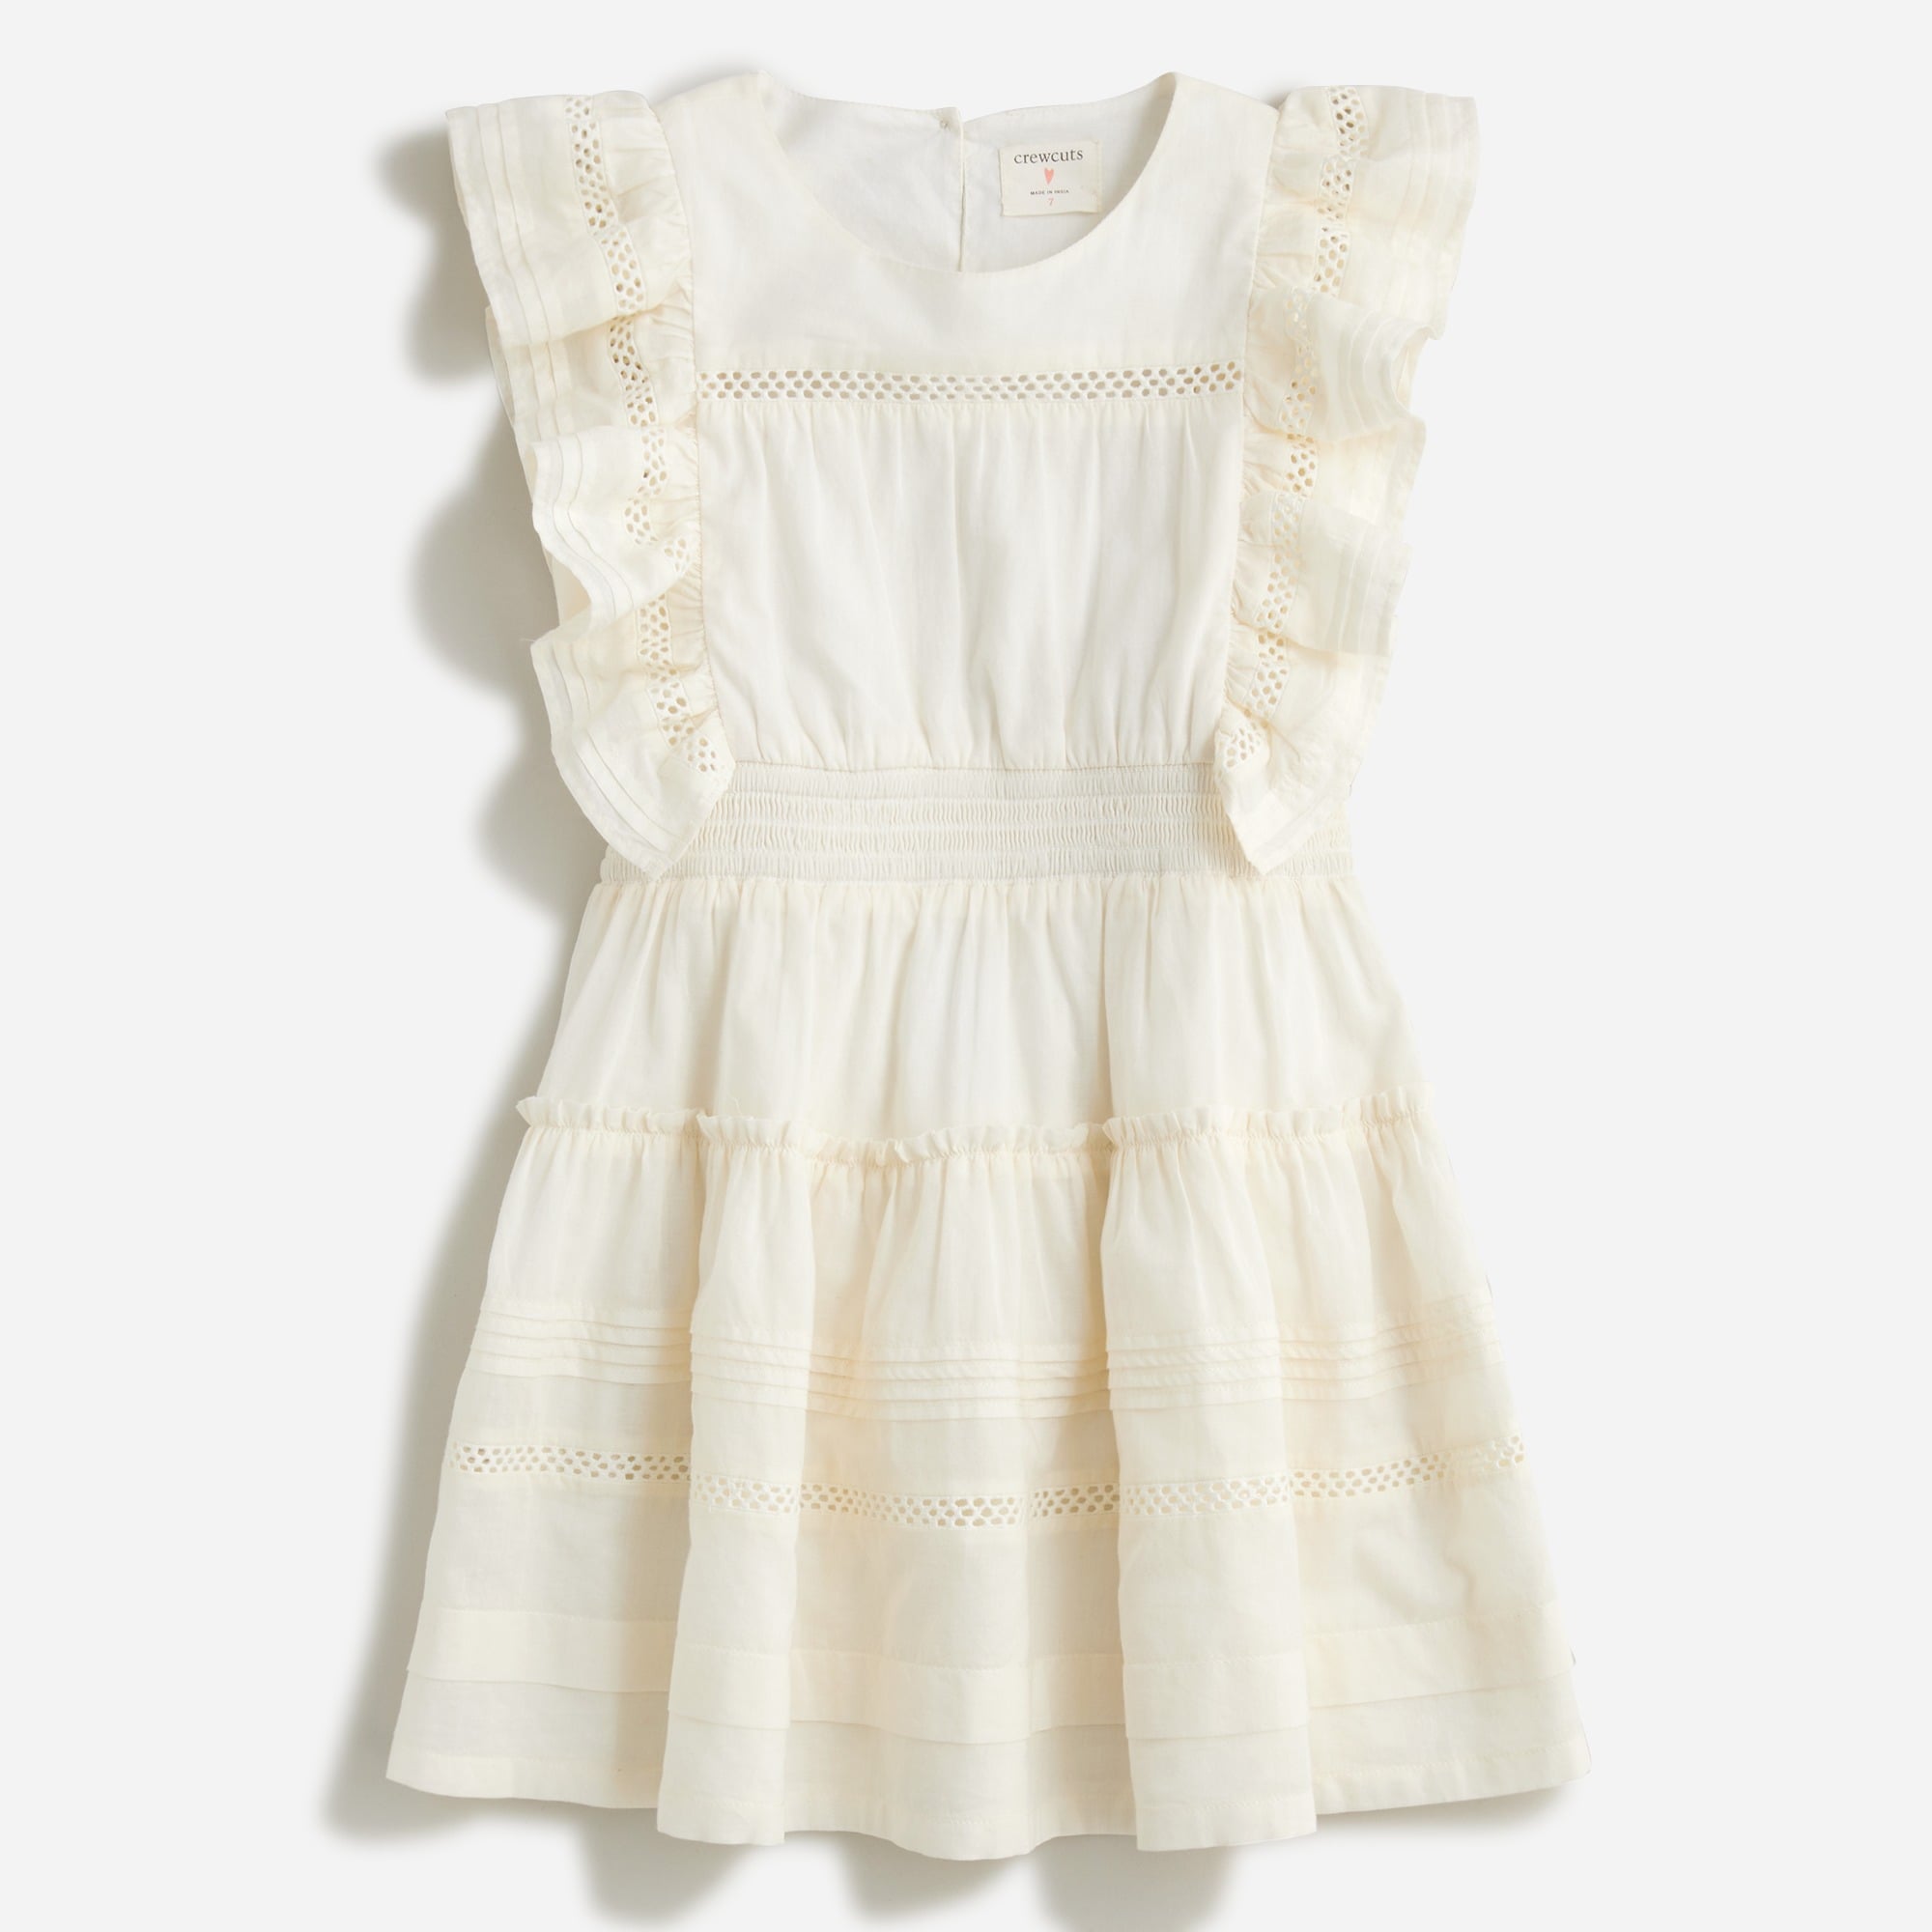  Girls' teatime dress in cotton voile